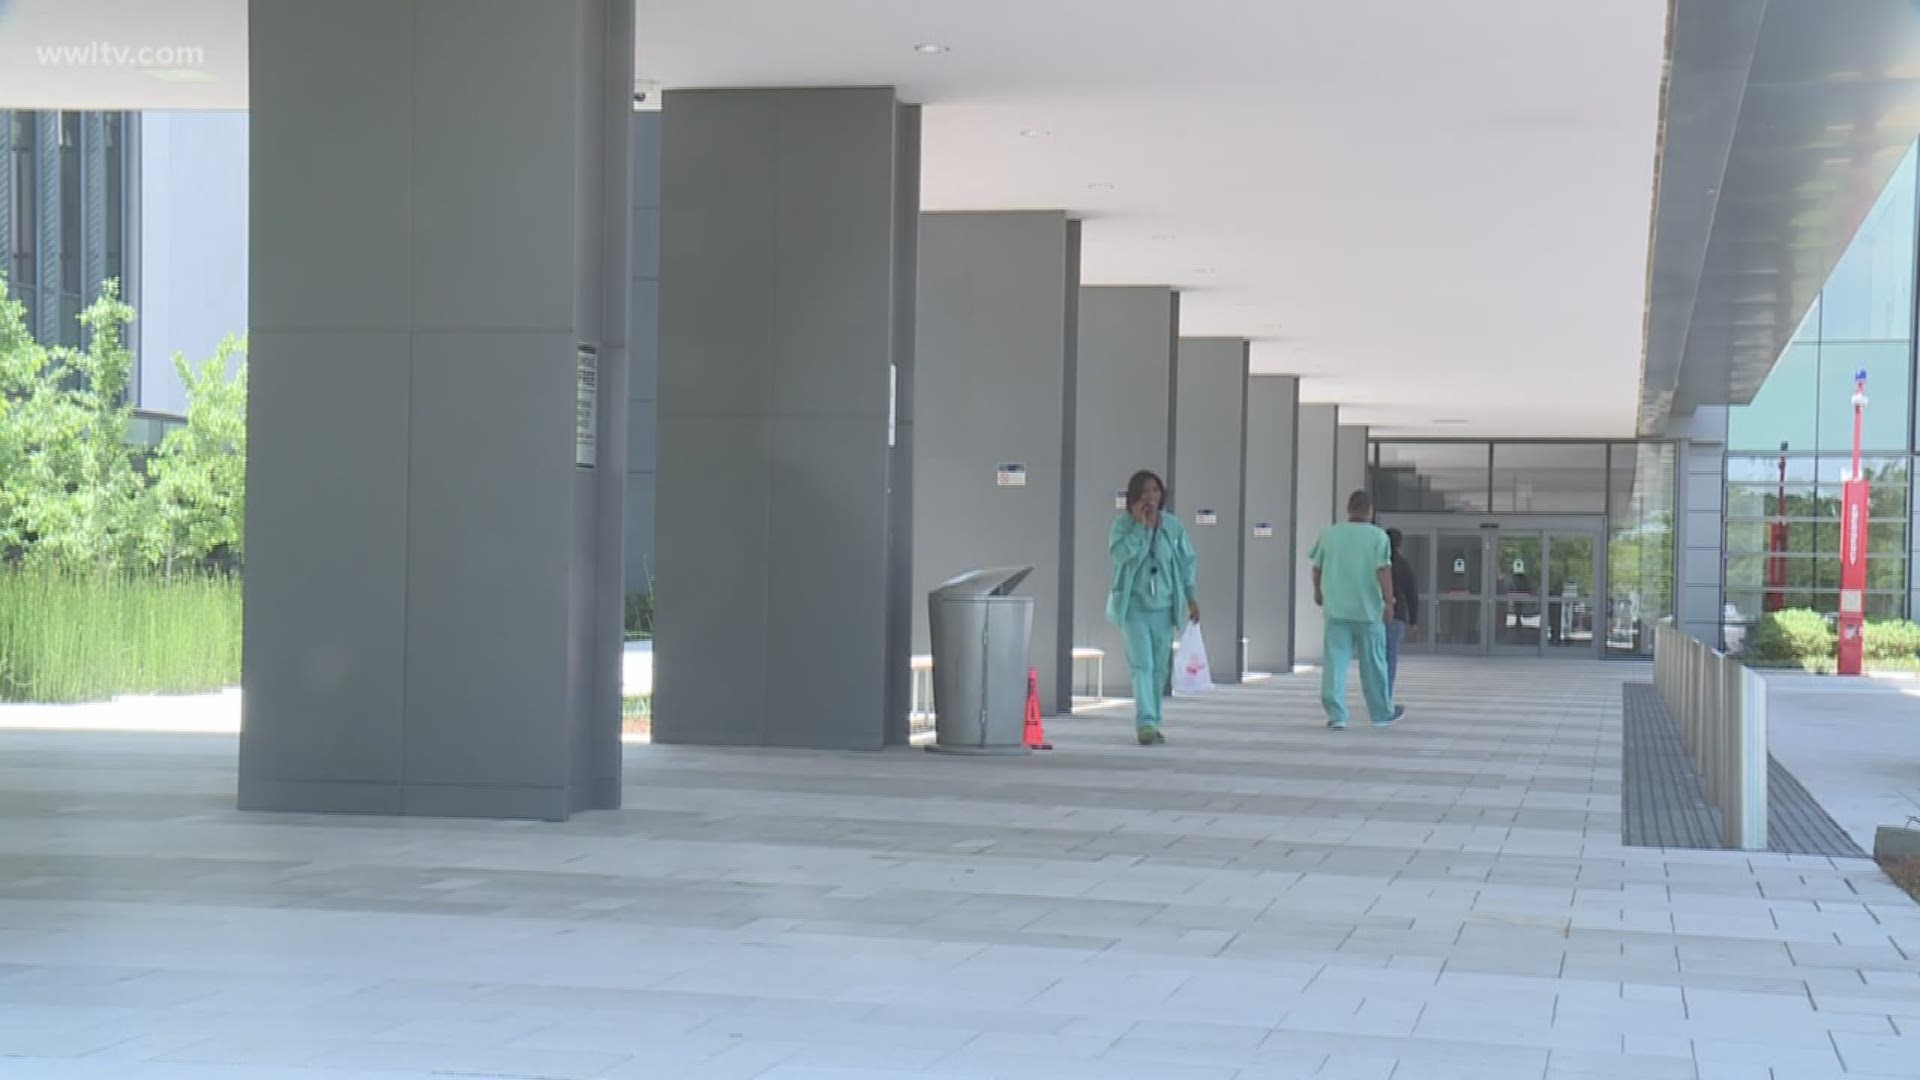 Eight years ago today, those injured in the BP Oil Spill and blast would have been brought to the new burn center. 